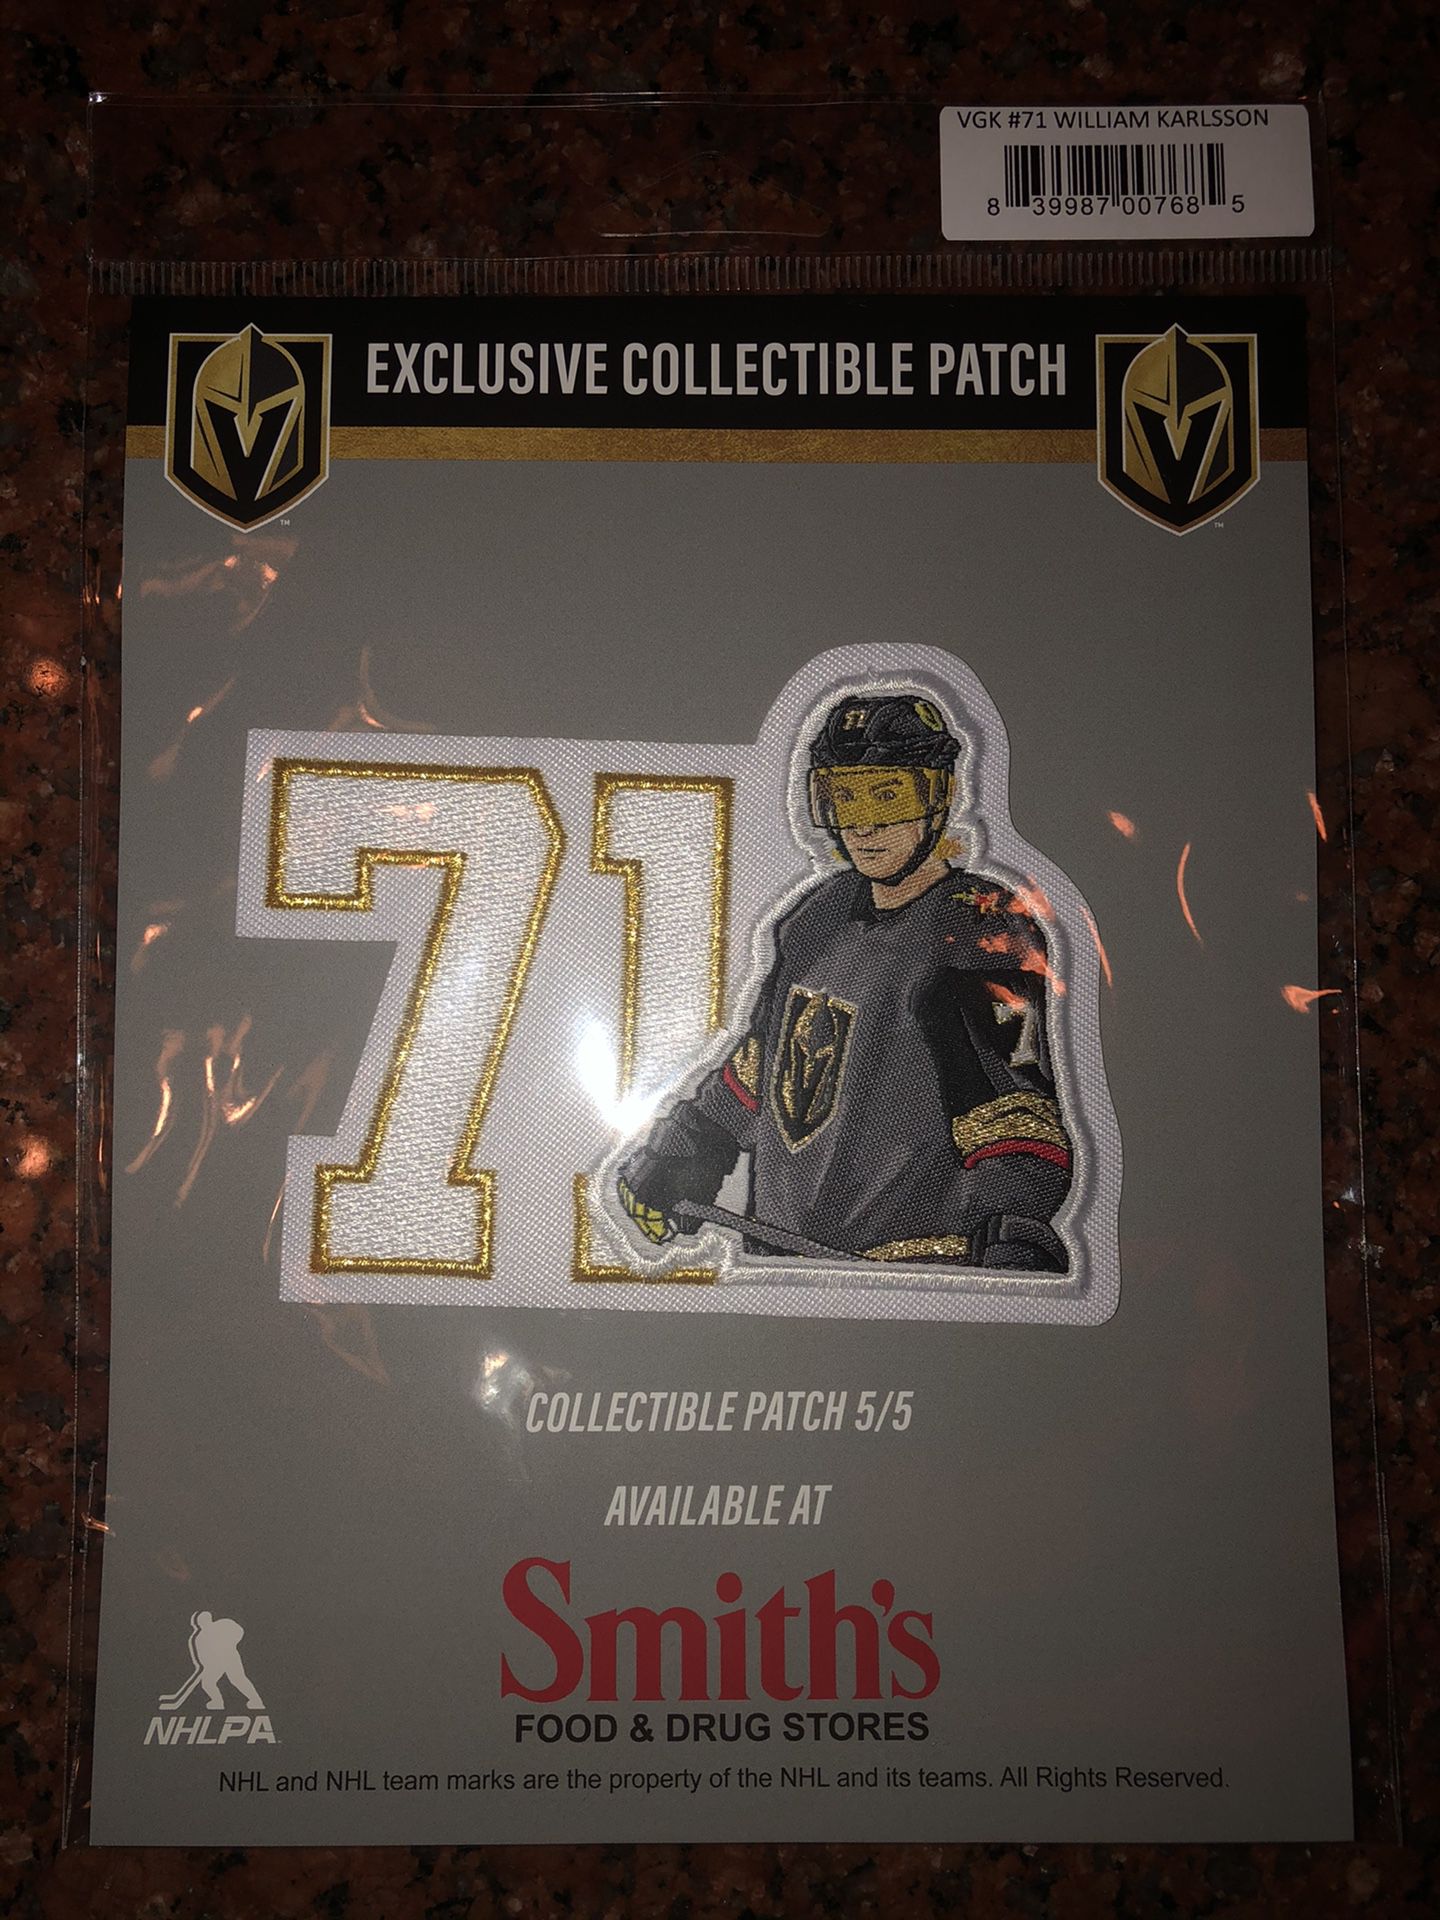 VGK PATCHES